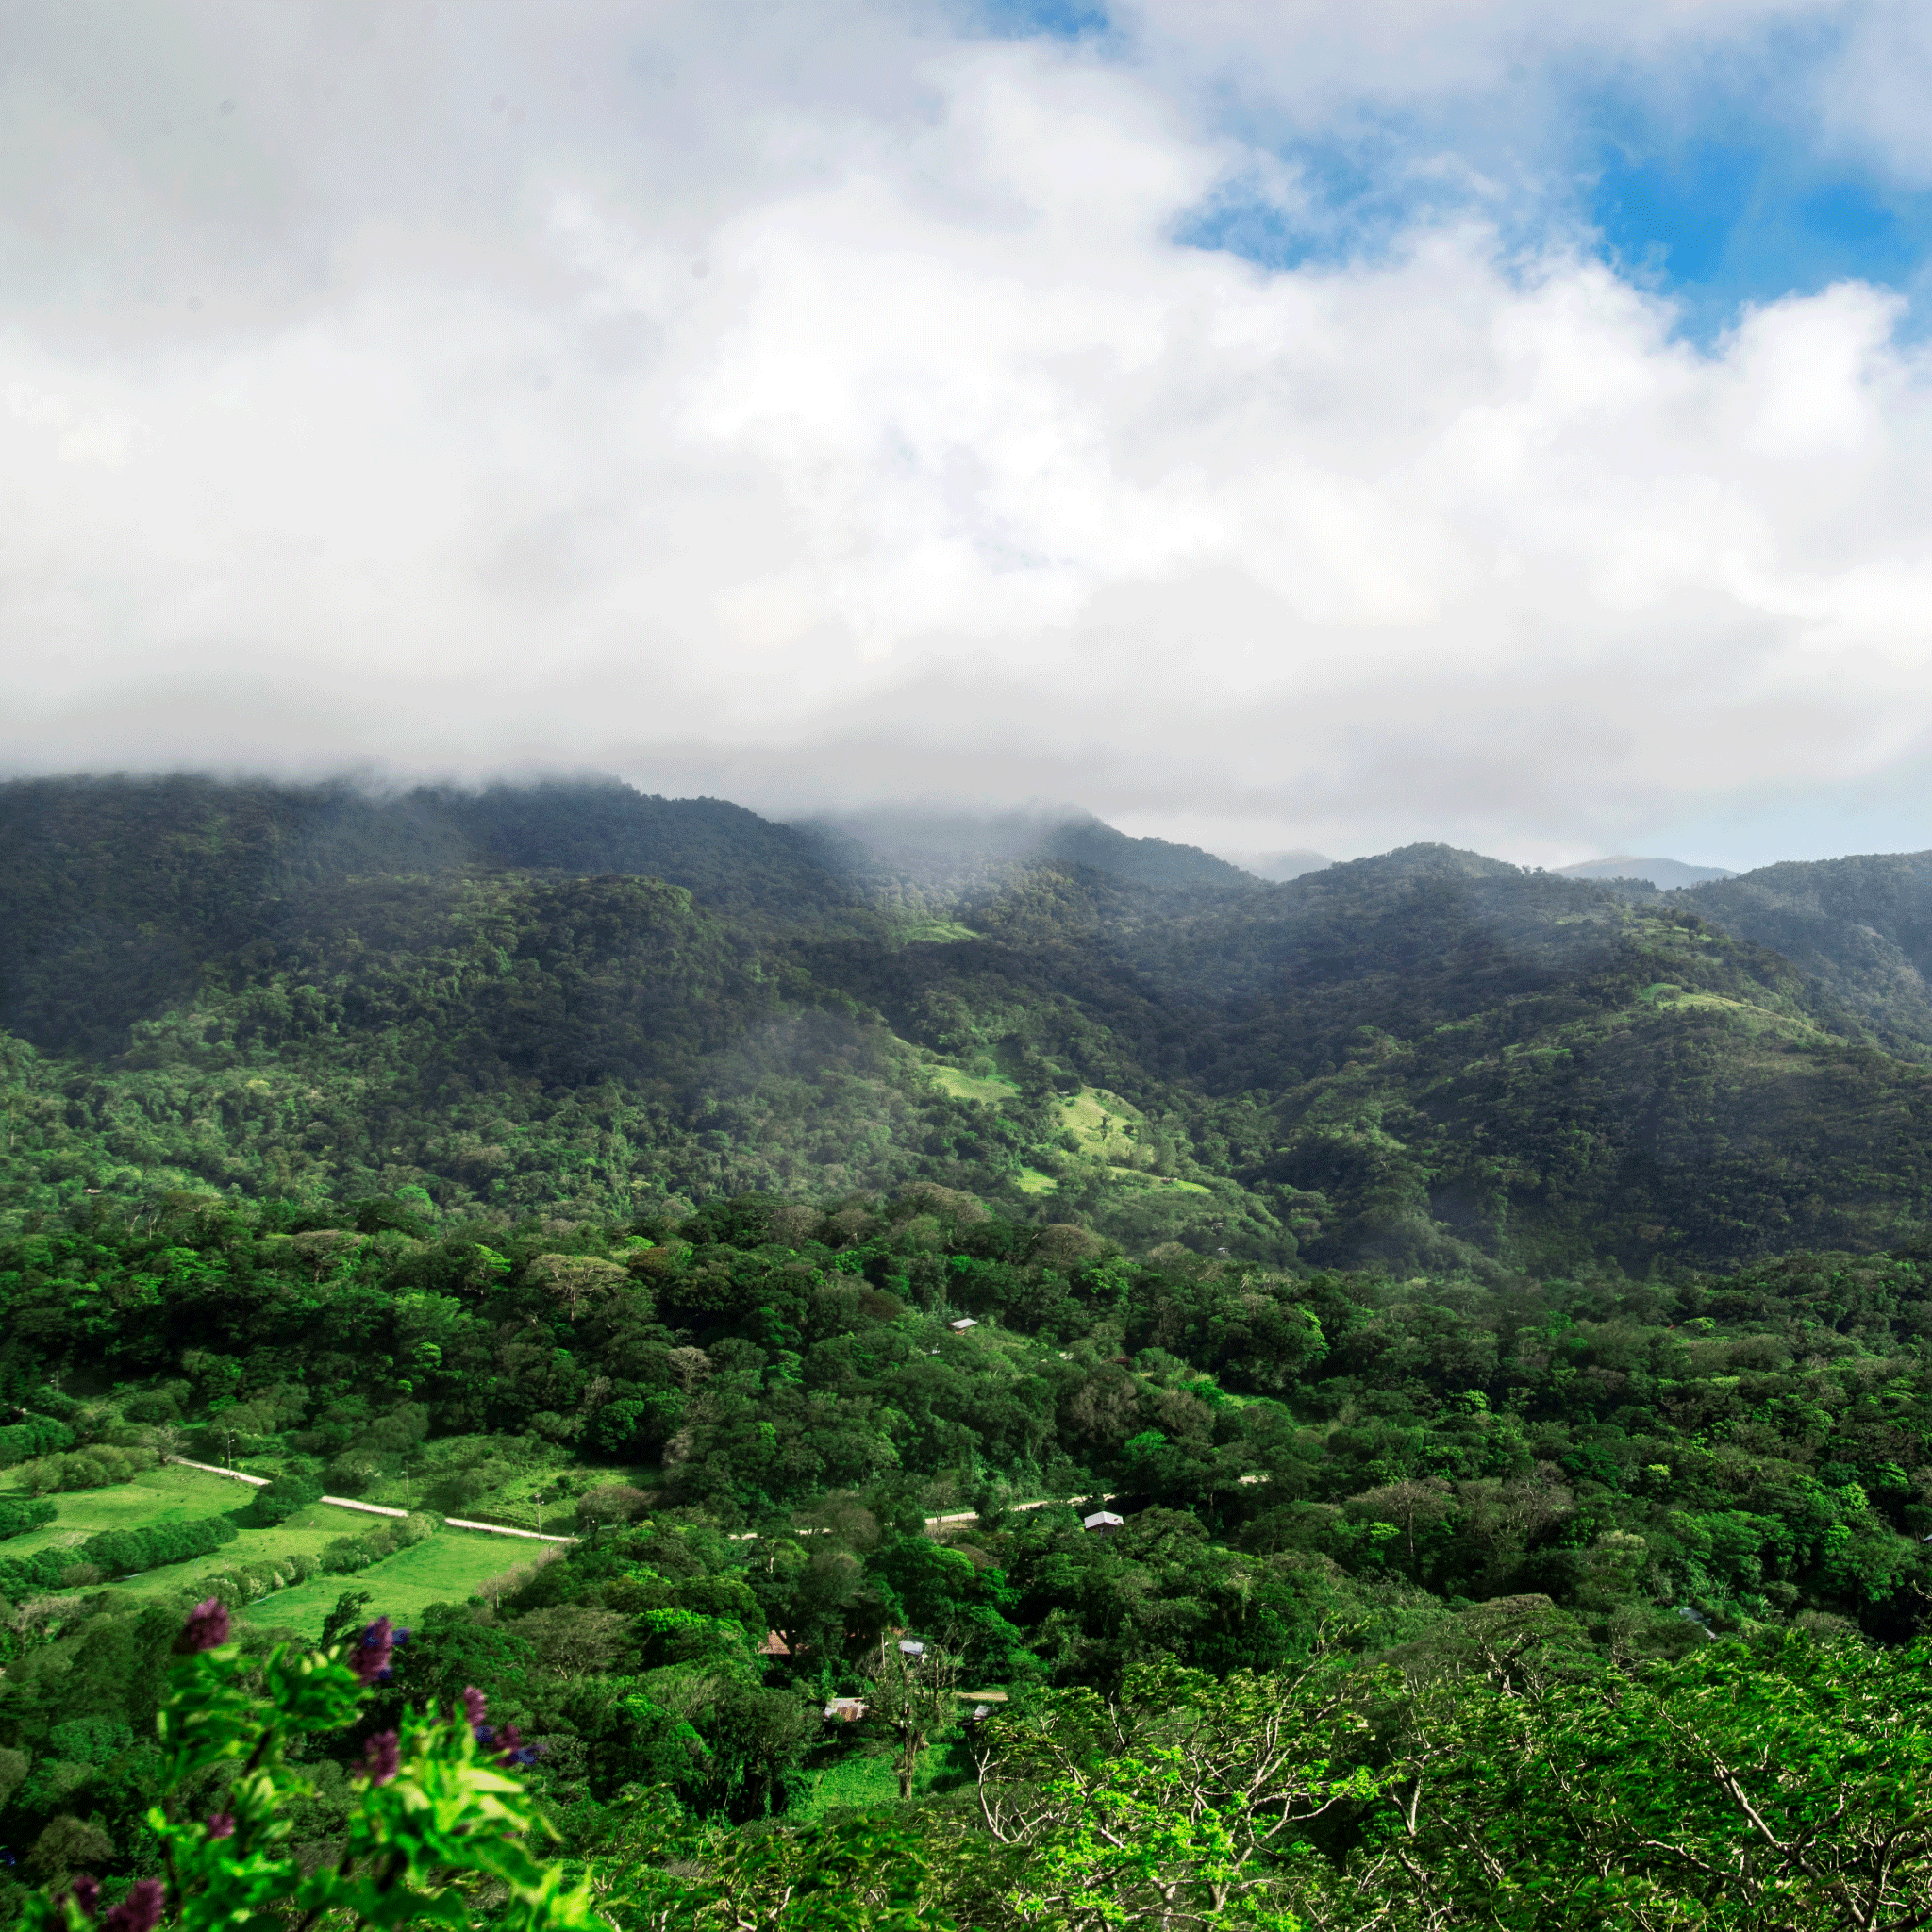 A lush green tropical forest and a partly cloudy blue sky